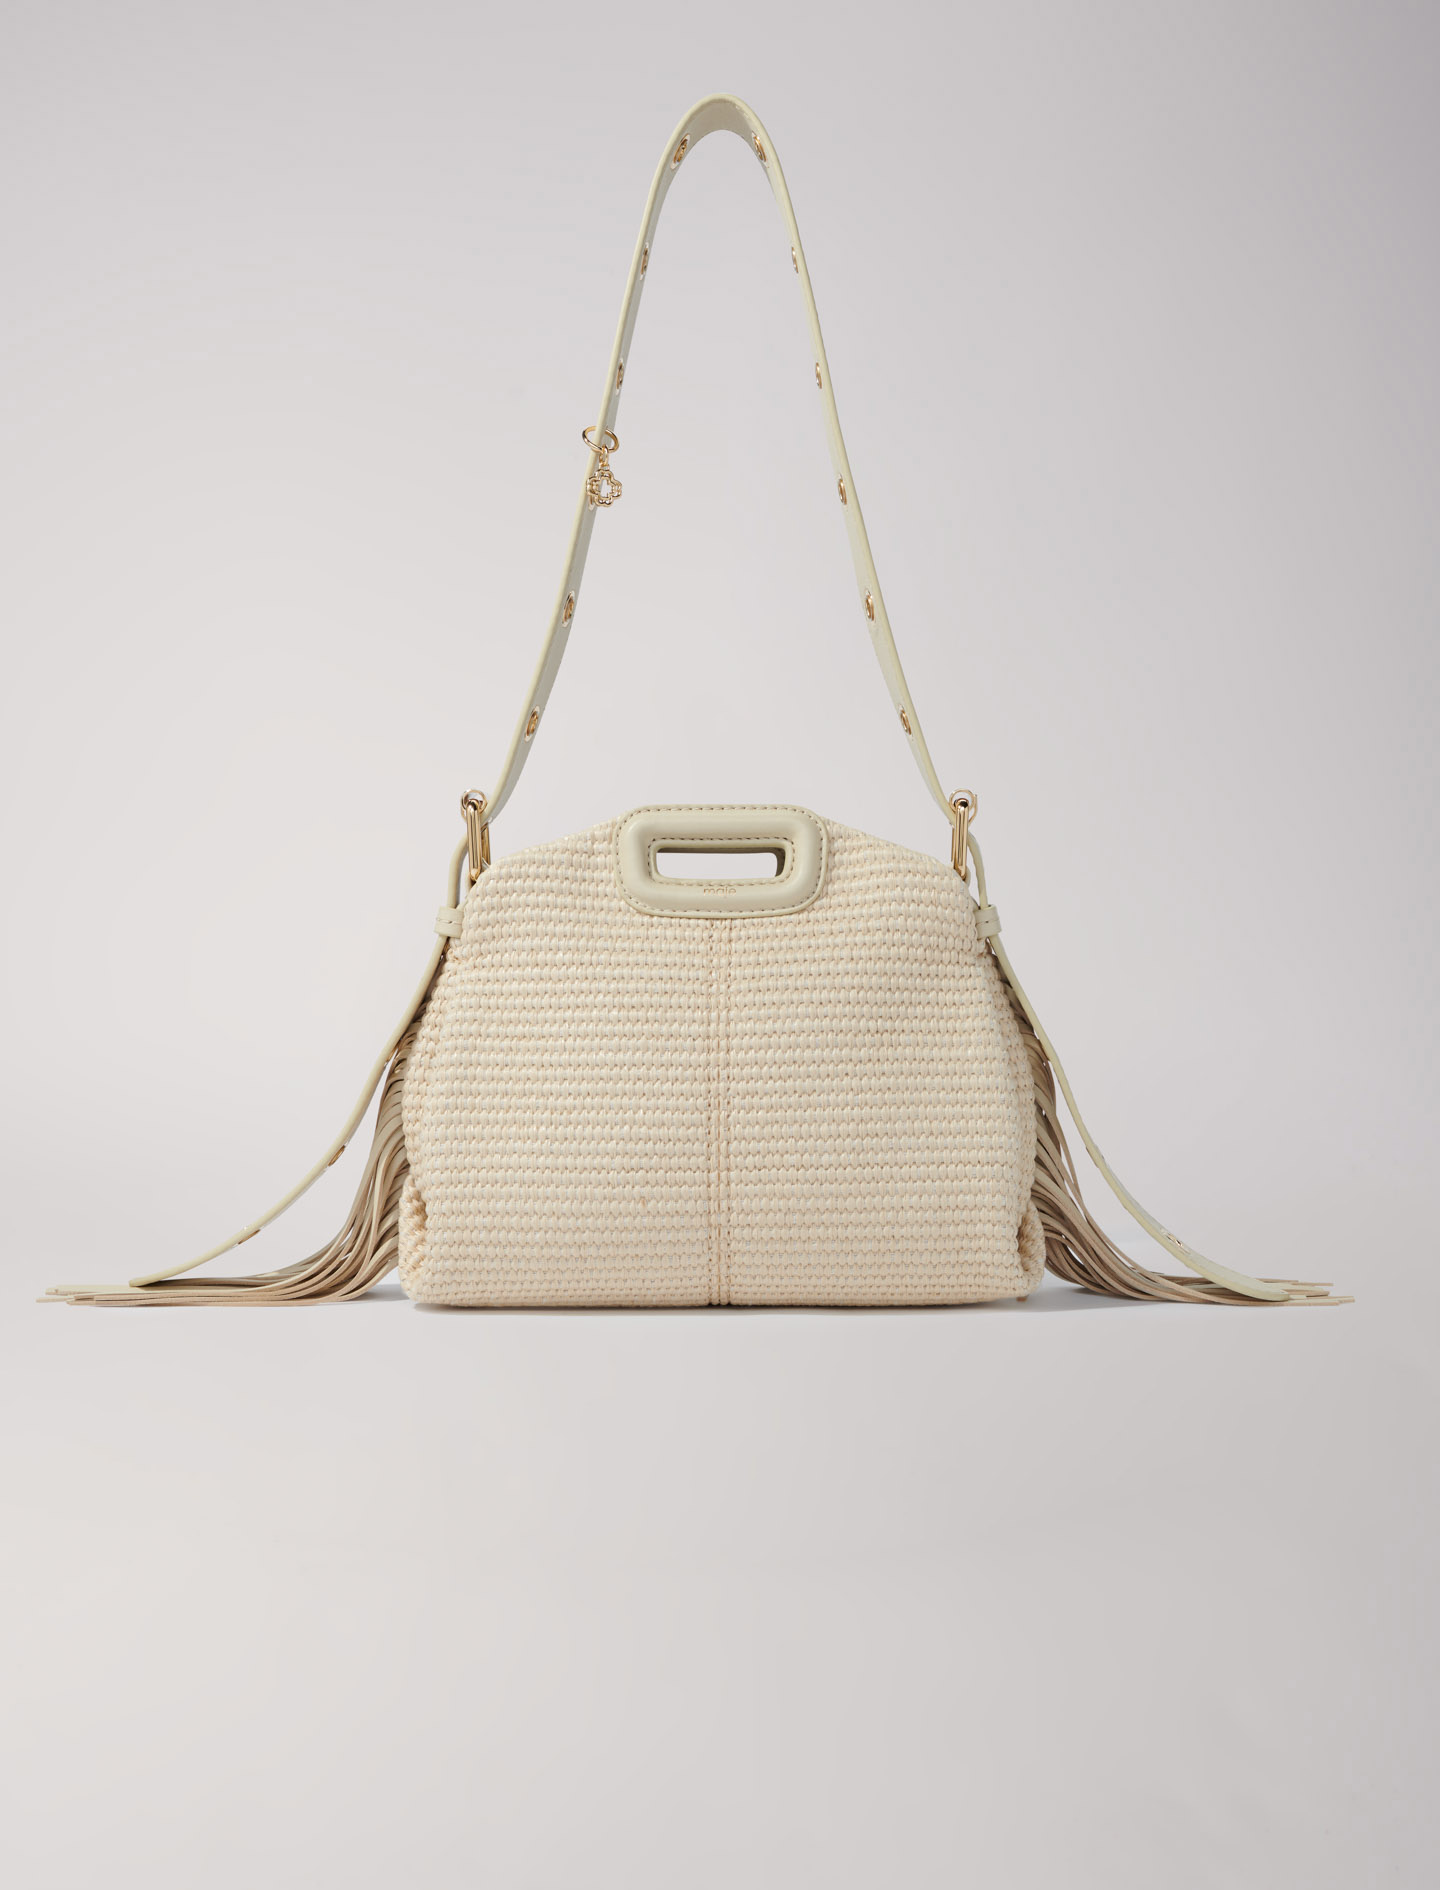 Mixte's polypropylene, Raffia effect Miss M Mini bag for Spring/Summer, size Mixte-All Bags-OS (ONE SIZE), in color Beige / Beige